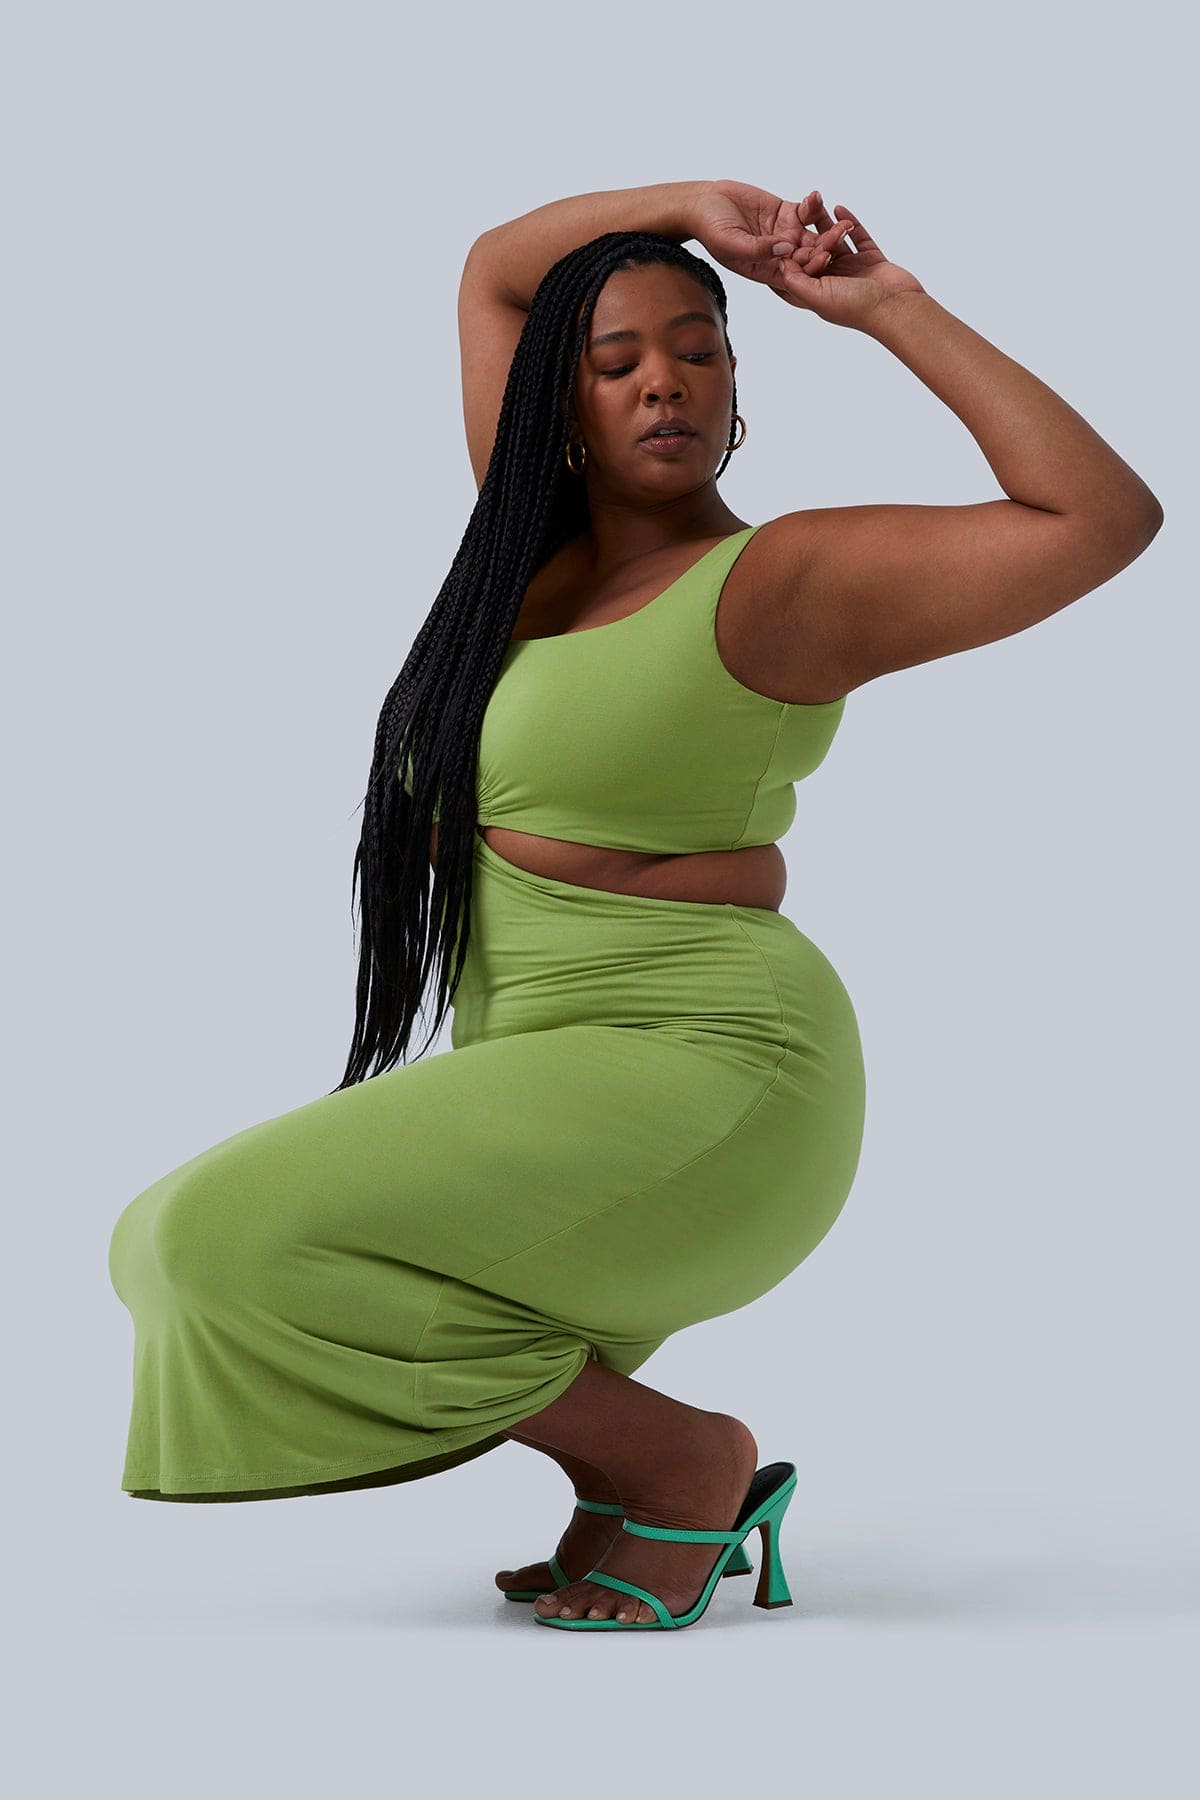 Plus size model squatting down and looking over her shoulder in Gigi Midi Dress by Gia IRL Plus Size Boutique. Dress is paired with turquoise heels and in size 1X.